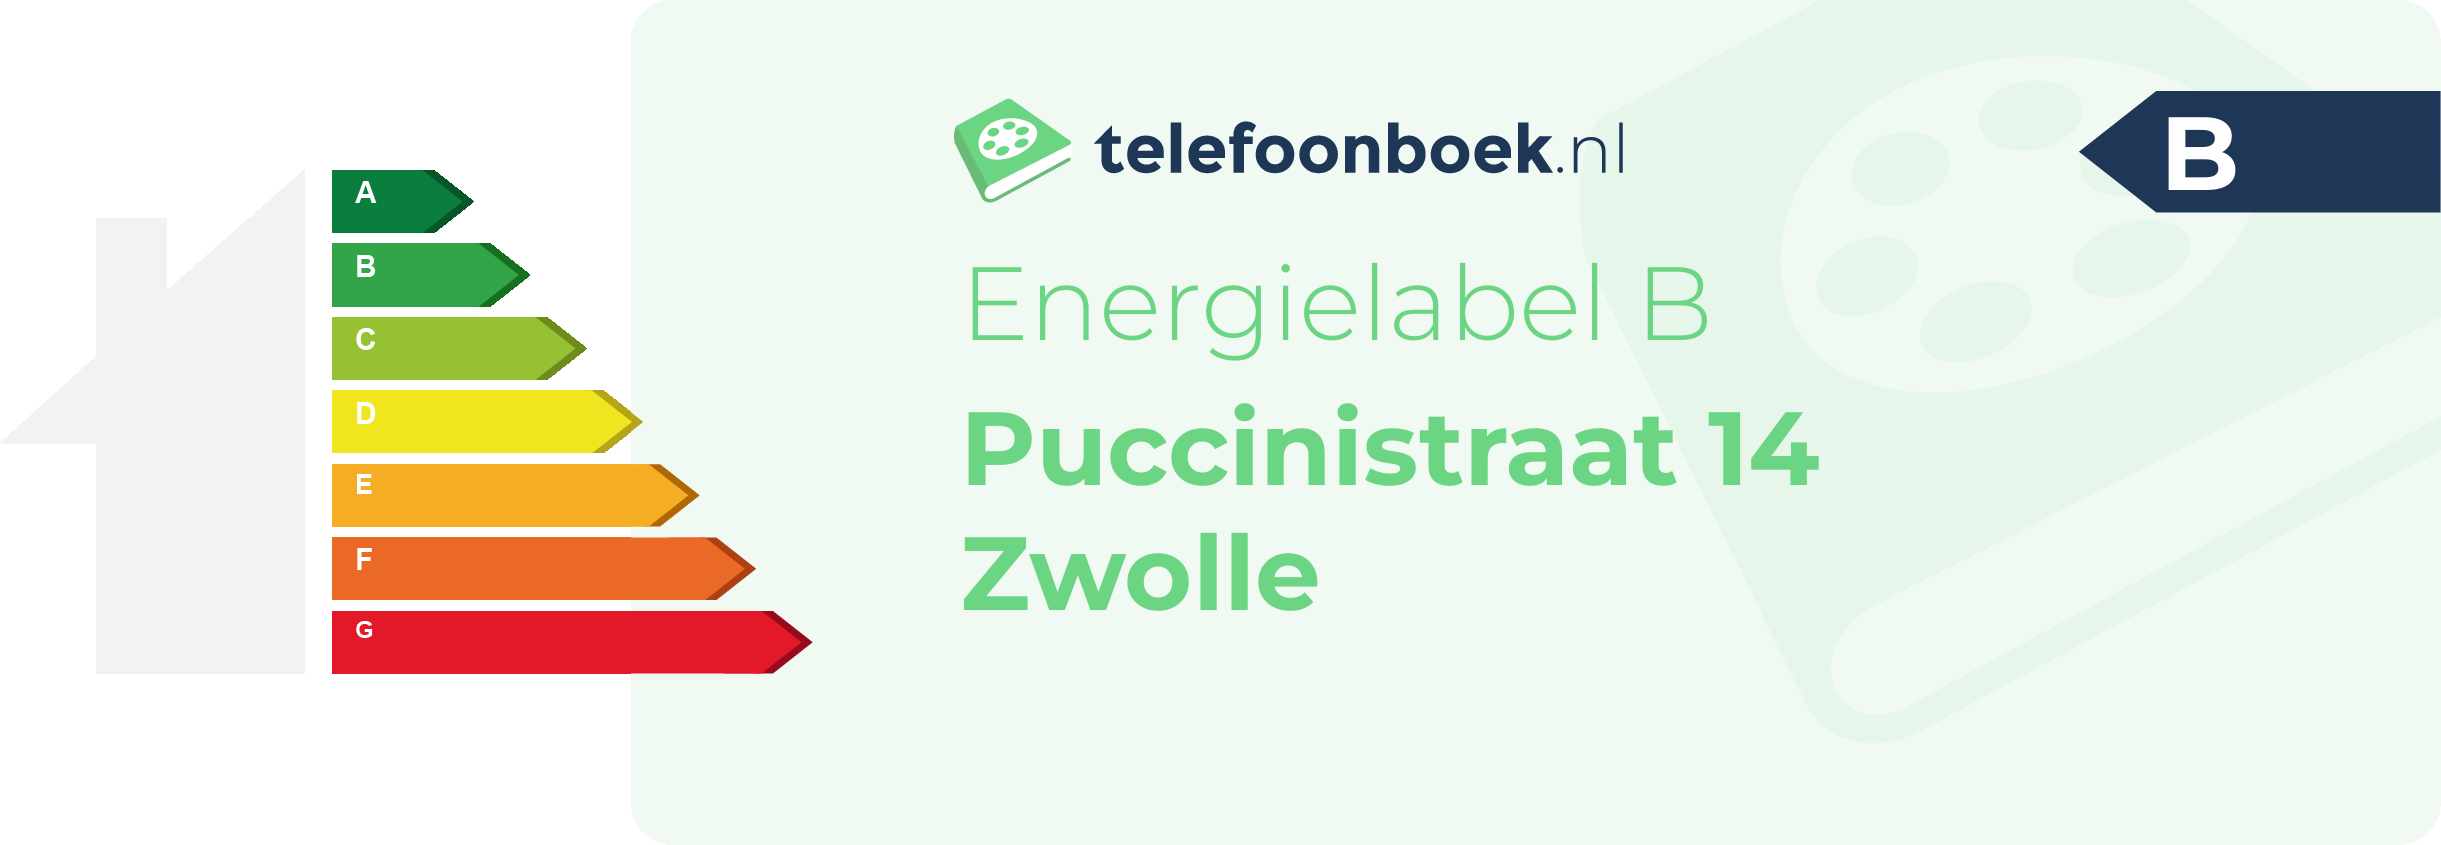 Energielabel Puccinistraat 14 Zwolle